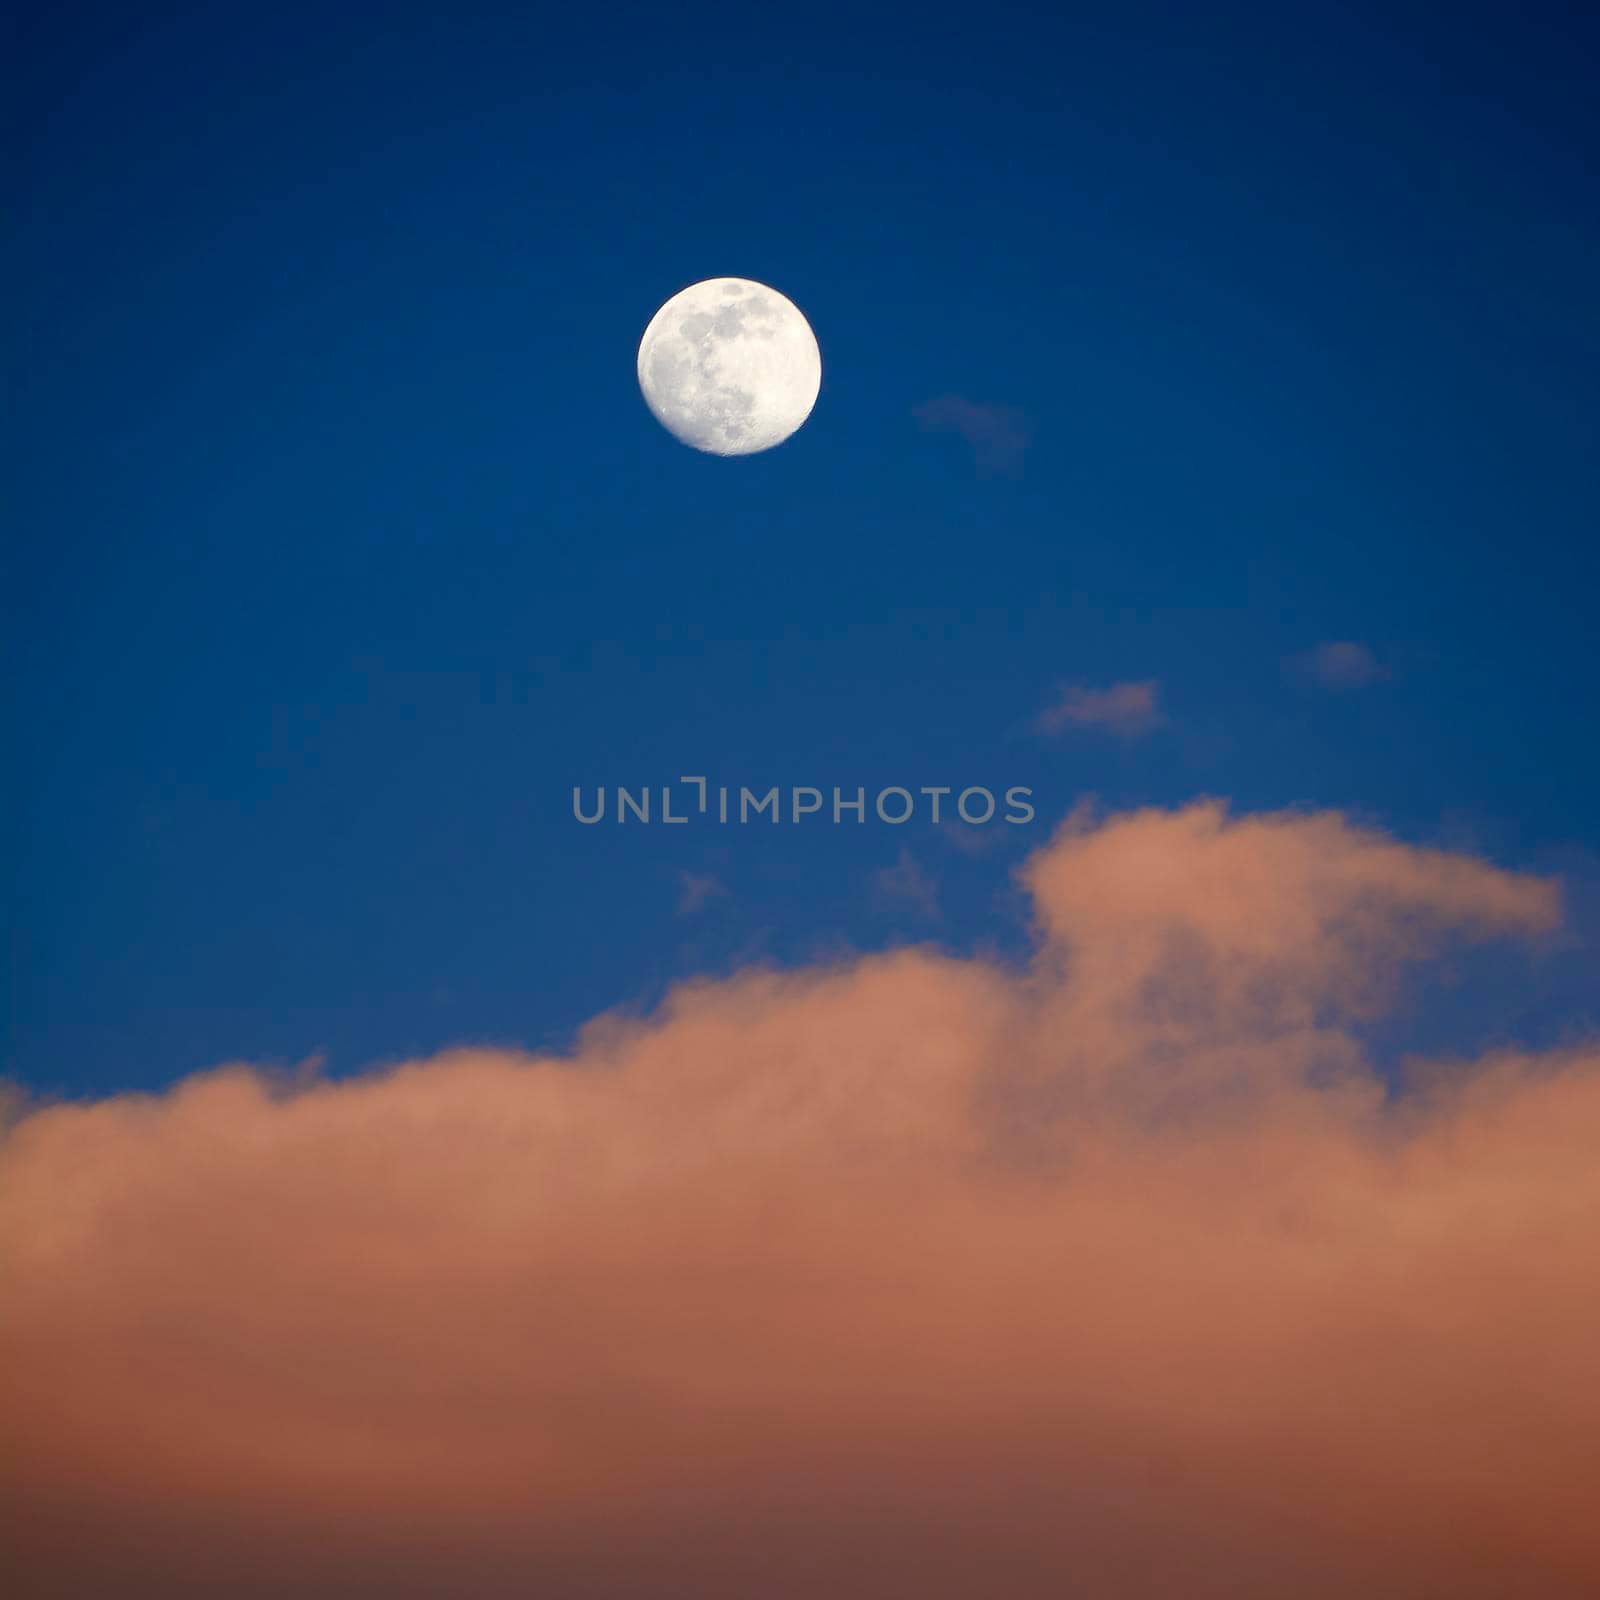 Moon in blue sky with white clouds by raul_ruiz